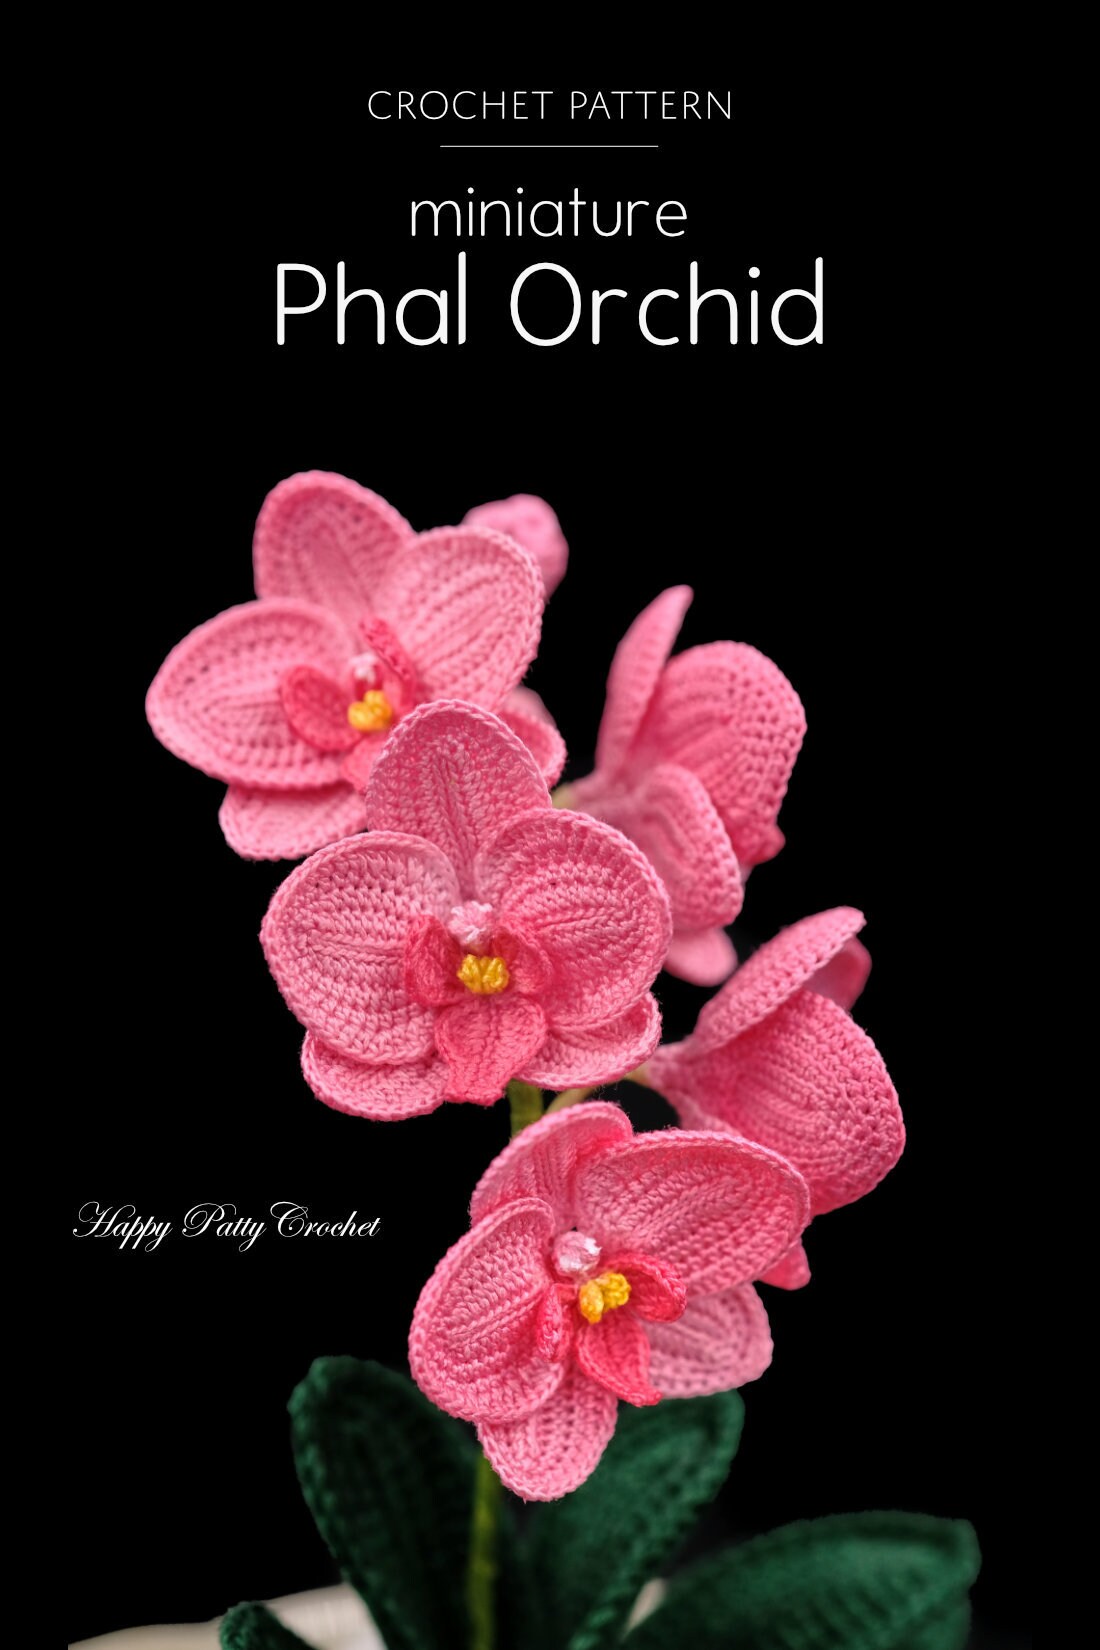 Crochet Pattern for Miniature Phal Orchid - Crochet Flower Pattern for Small Moth Orchids